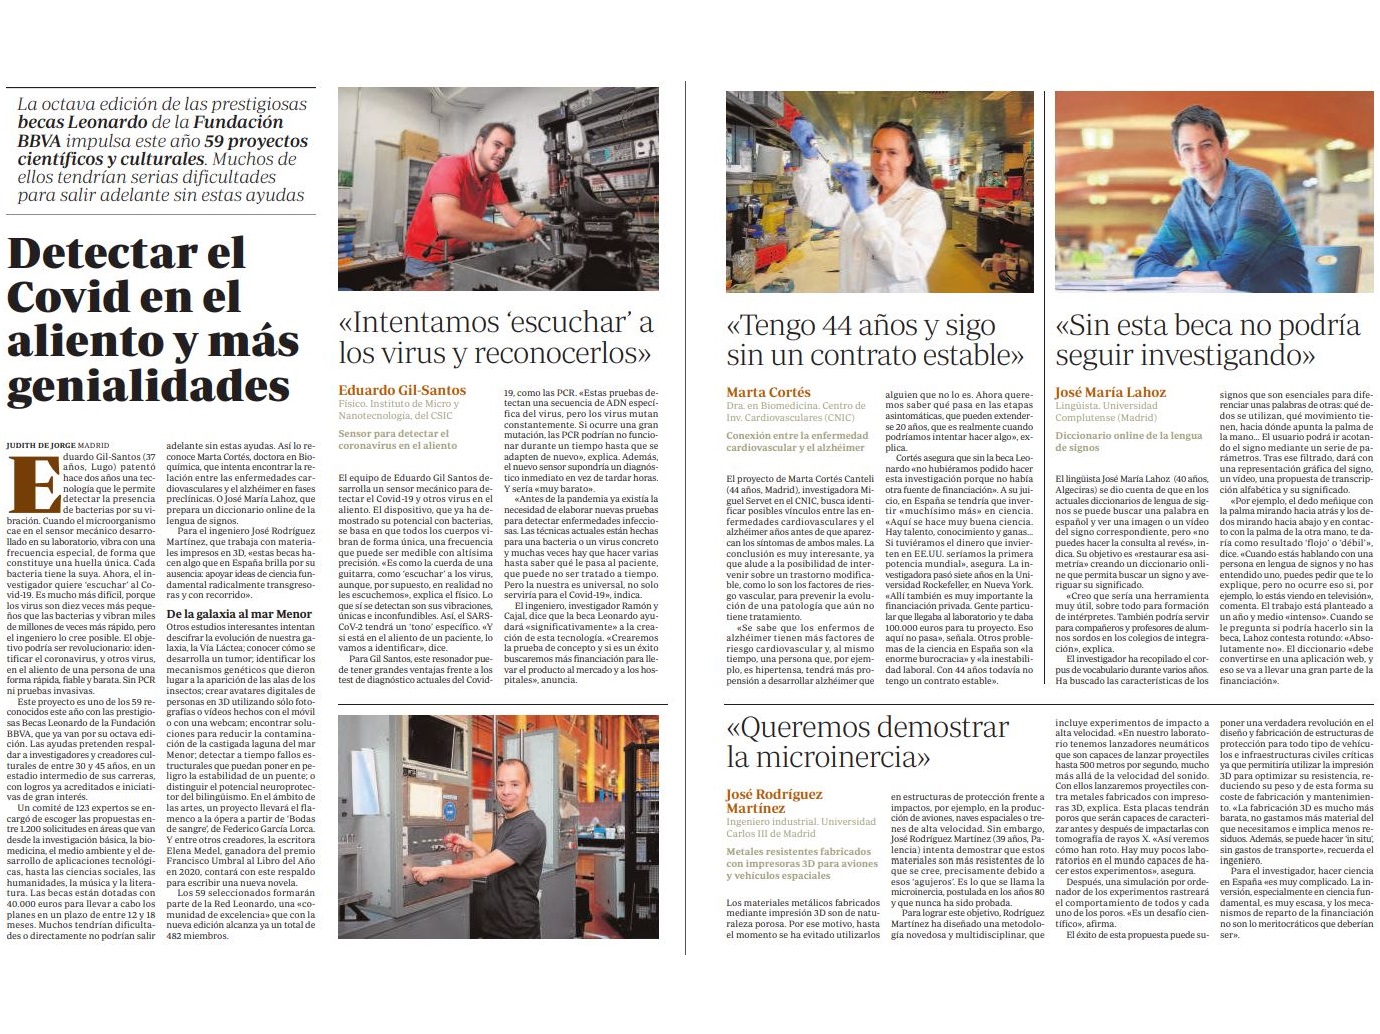 We are in the news again! Jose gives an interview to ABC national newspaper about the BBVA Leonardo grant